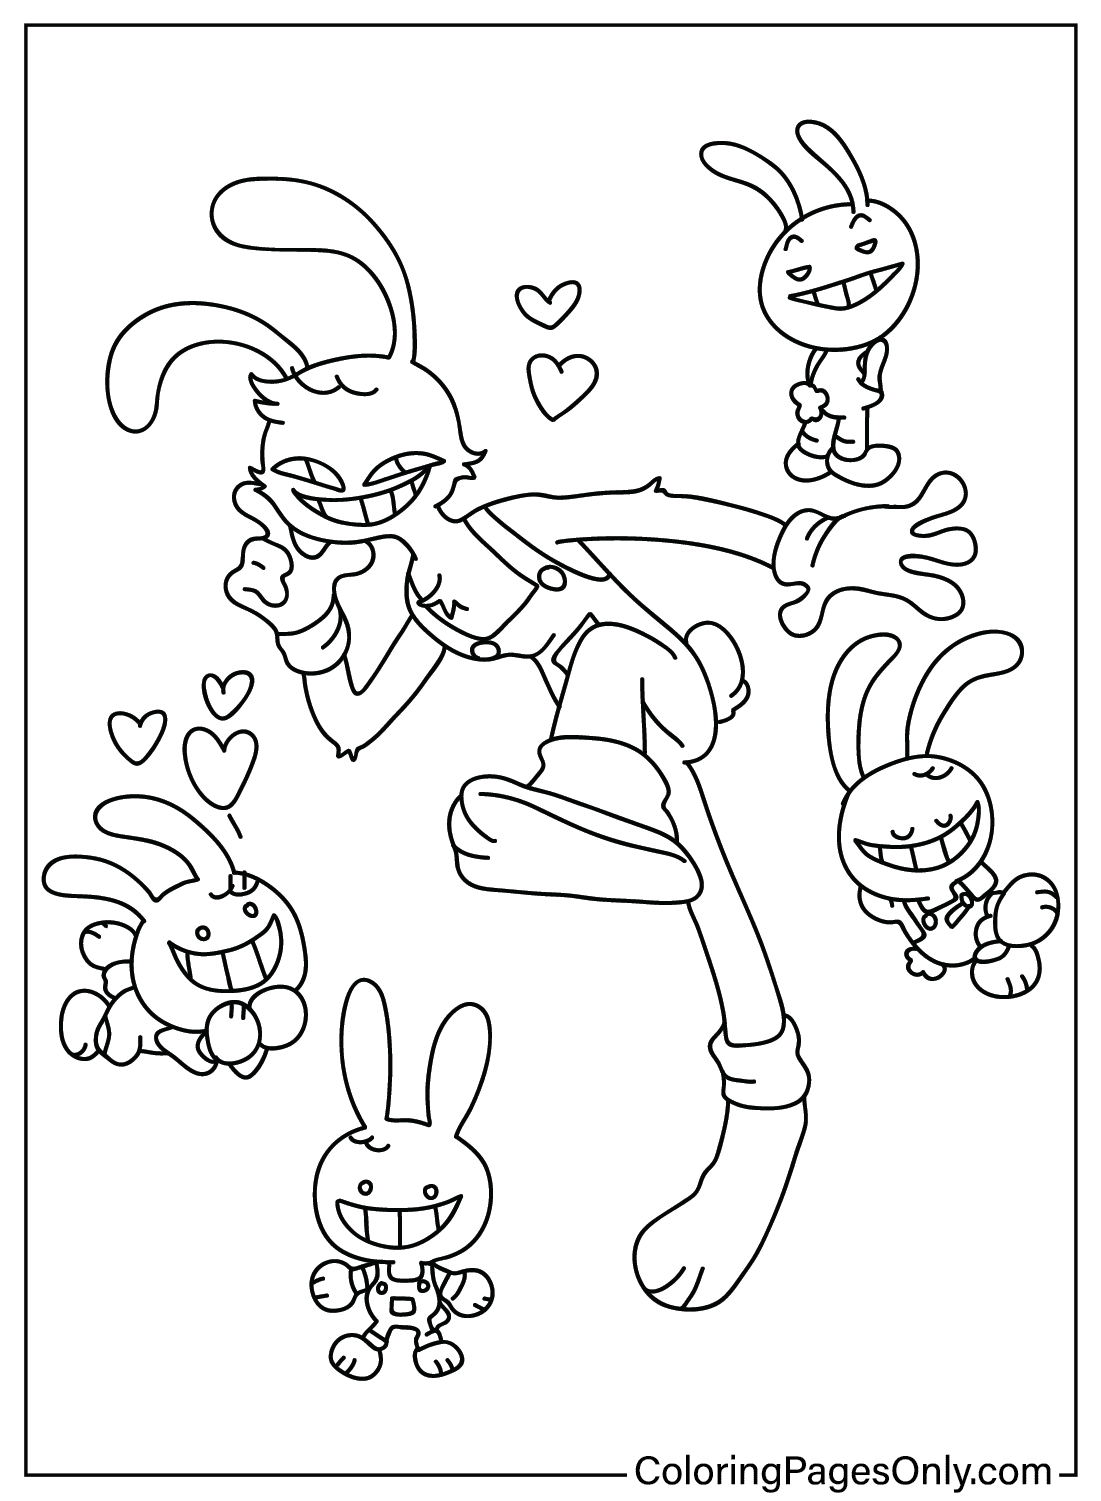 Jax Coloring Page to Print from Jax